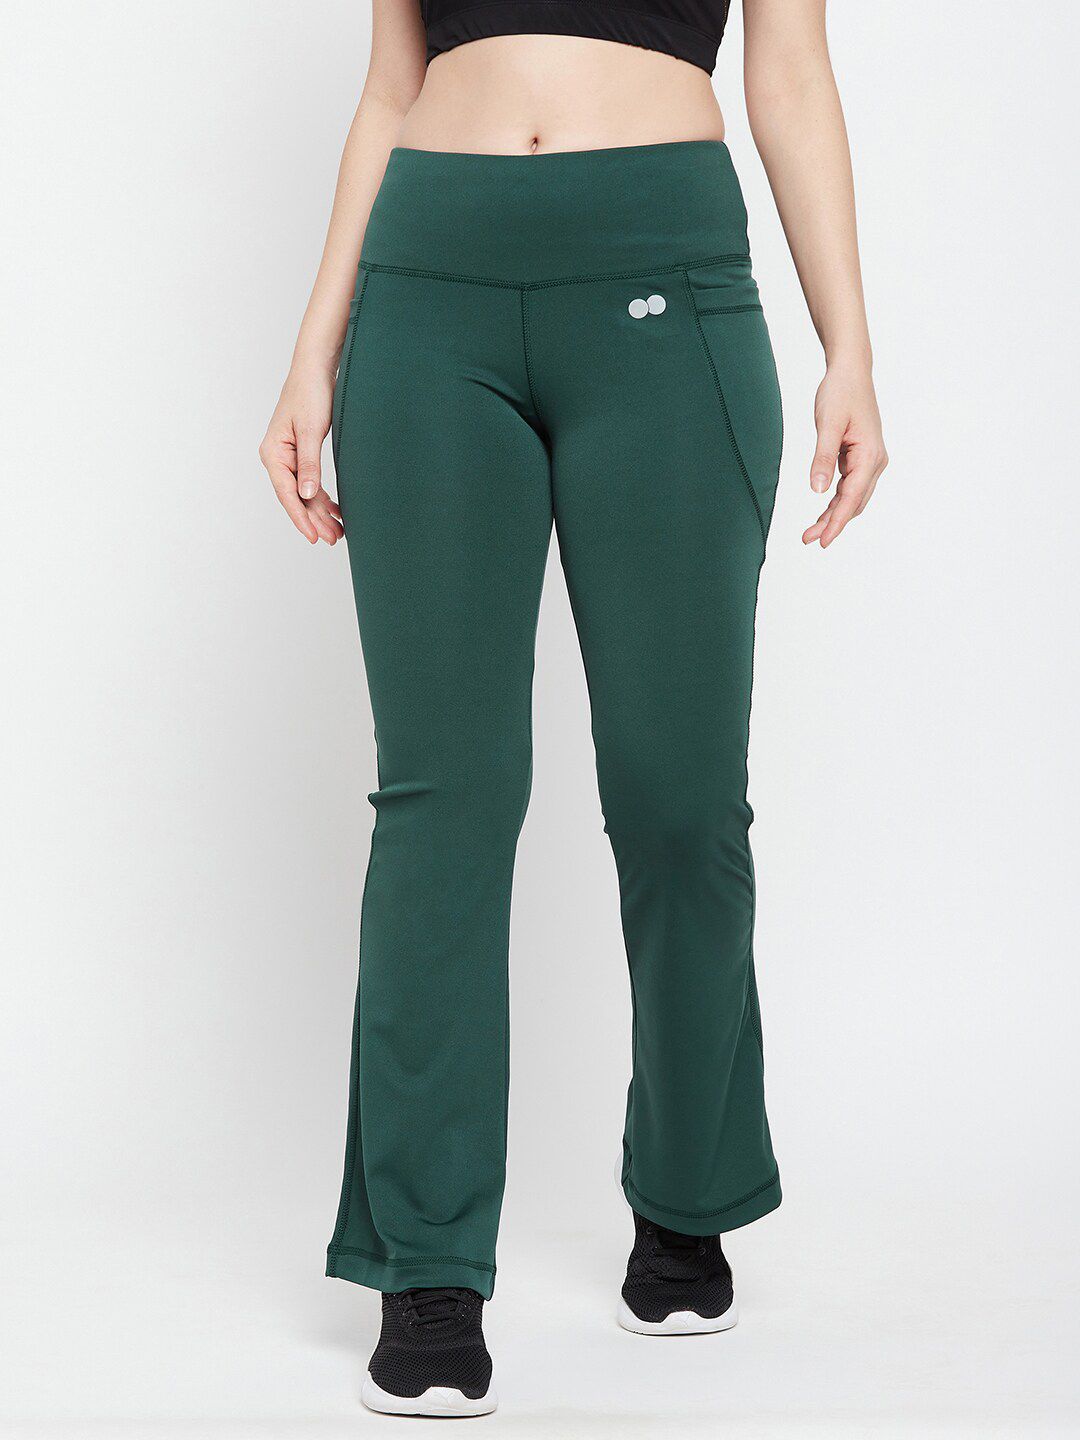 Clovia Women Green Solid Comfort-Fit High Waist Flared Yoga Pants Price in India